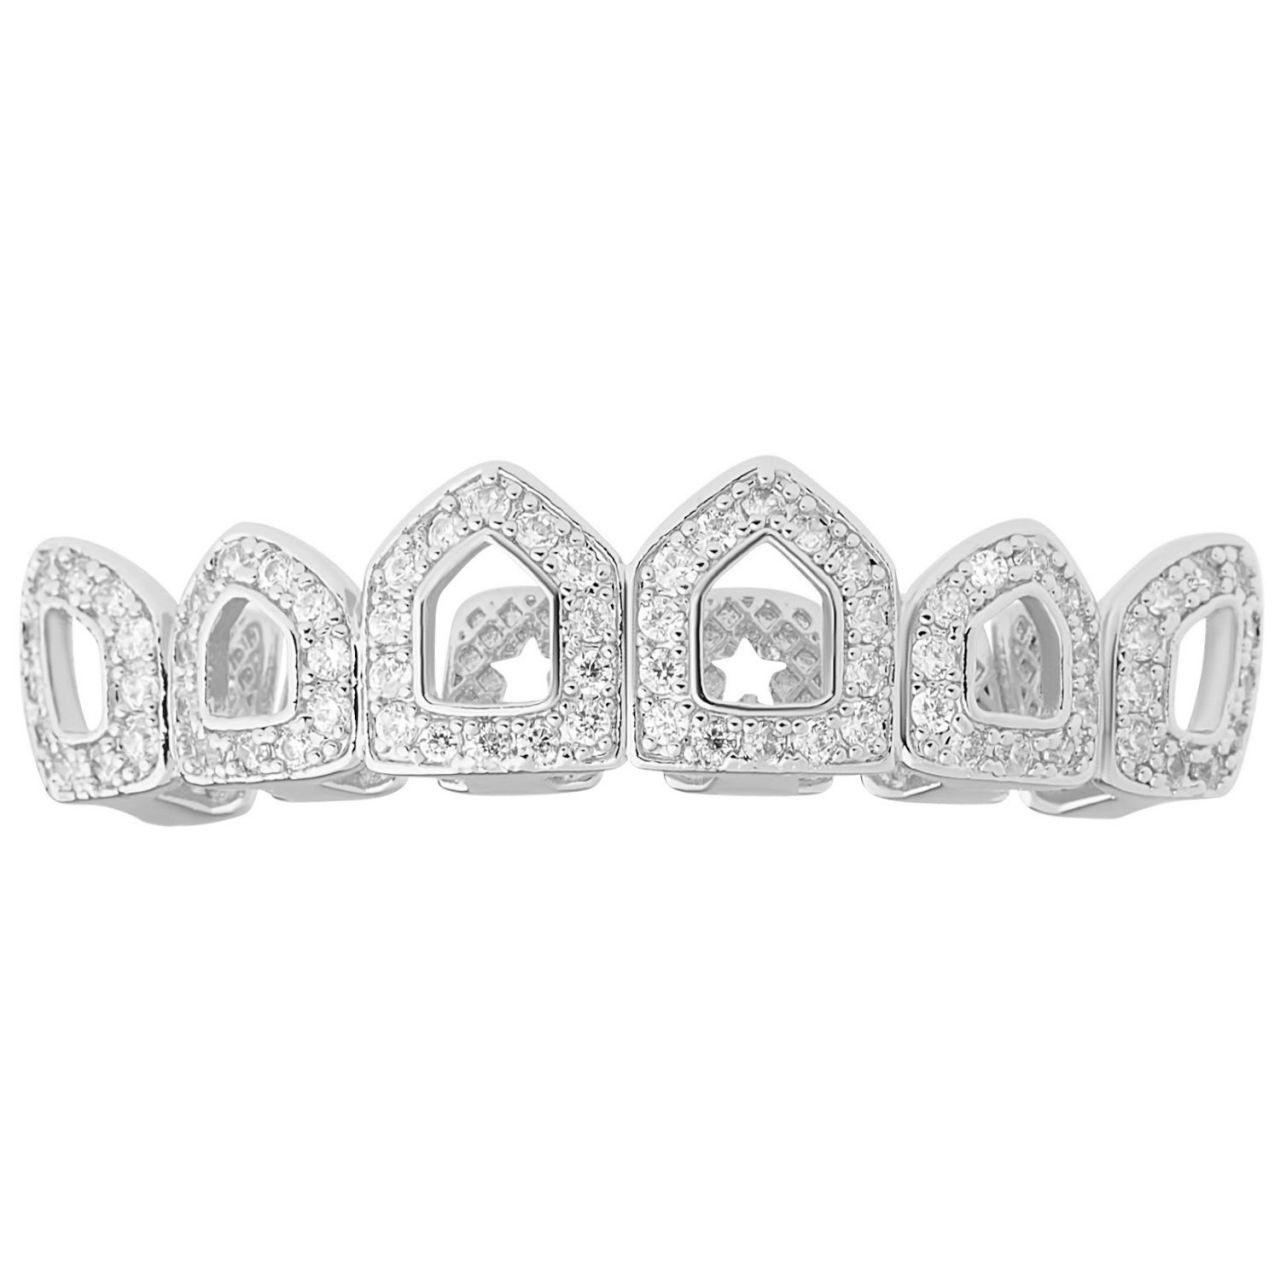 One size fits all Top Grillz - CUBIC ZIRKONIA offen, silber